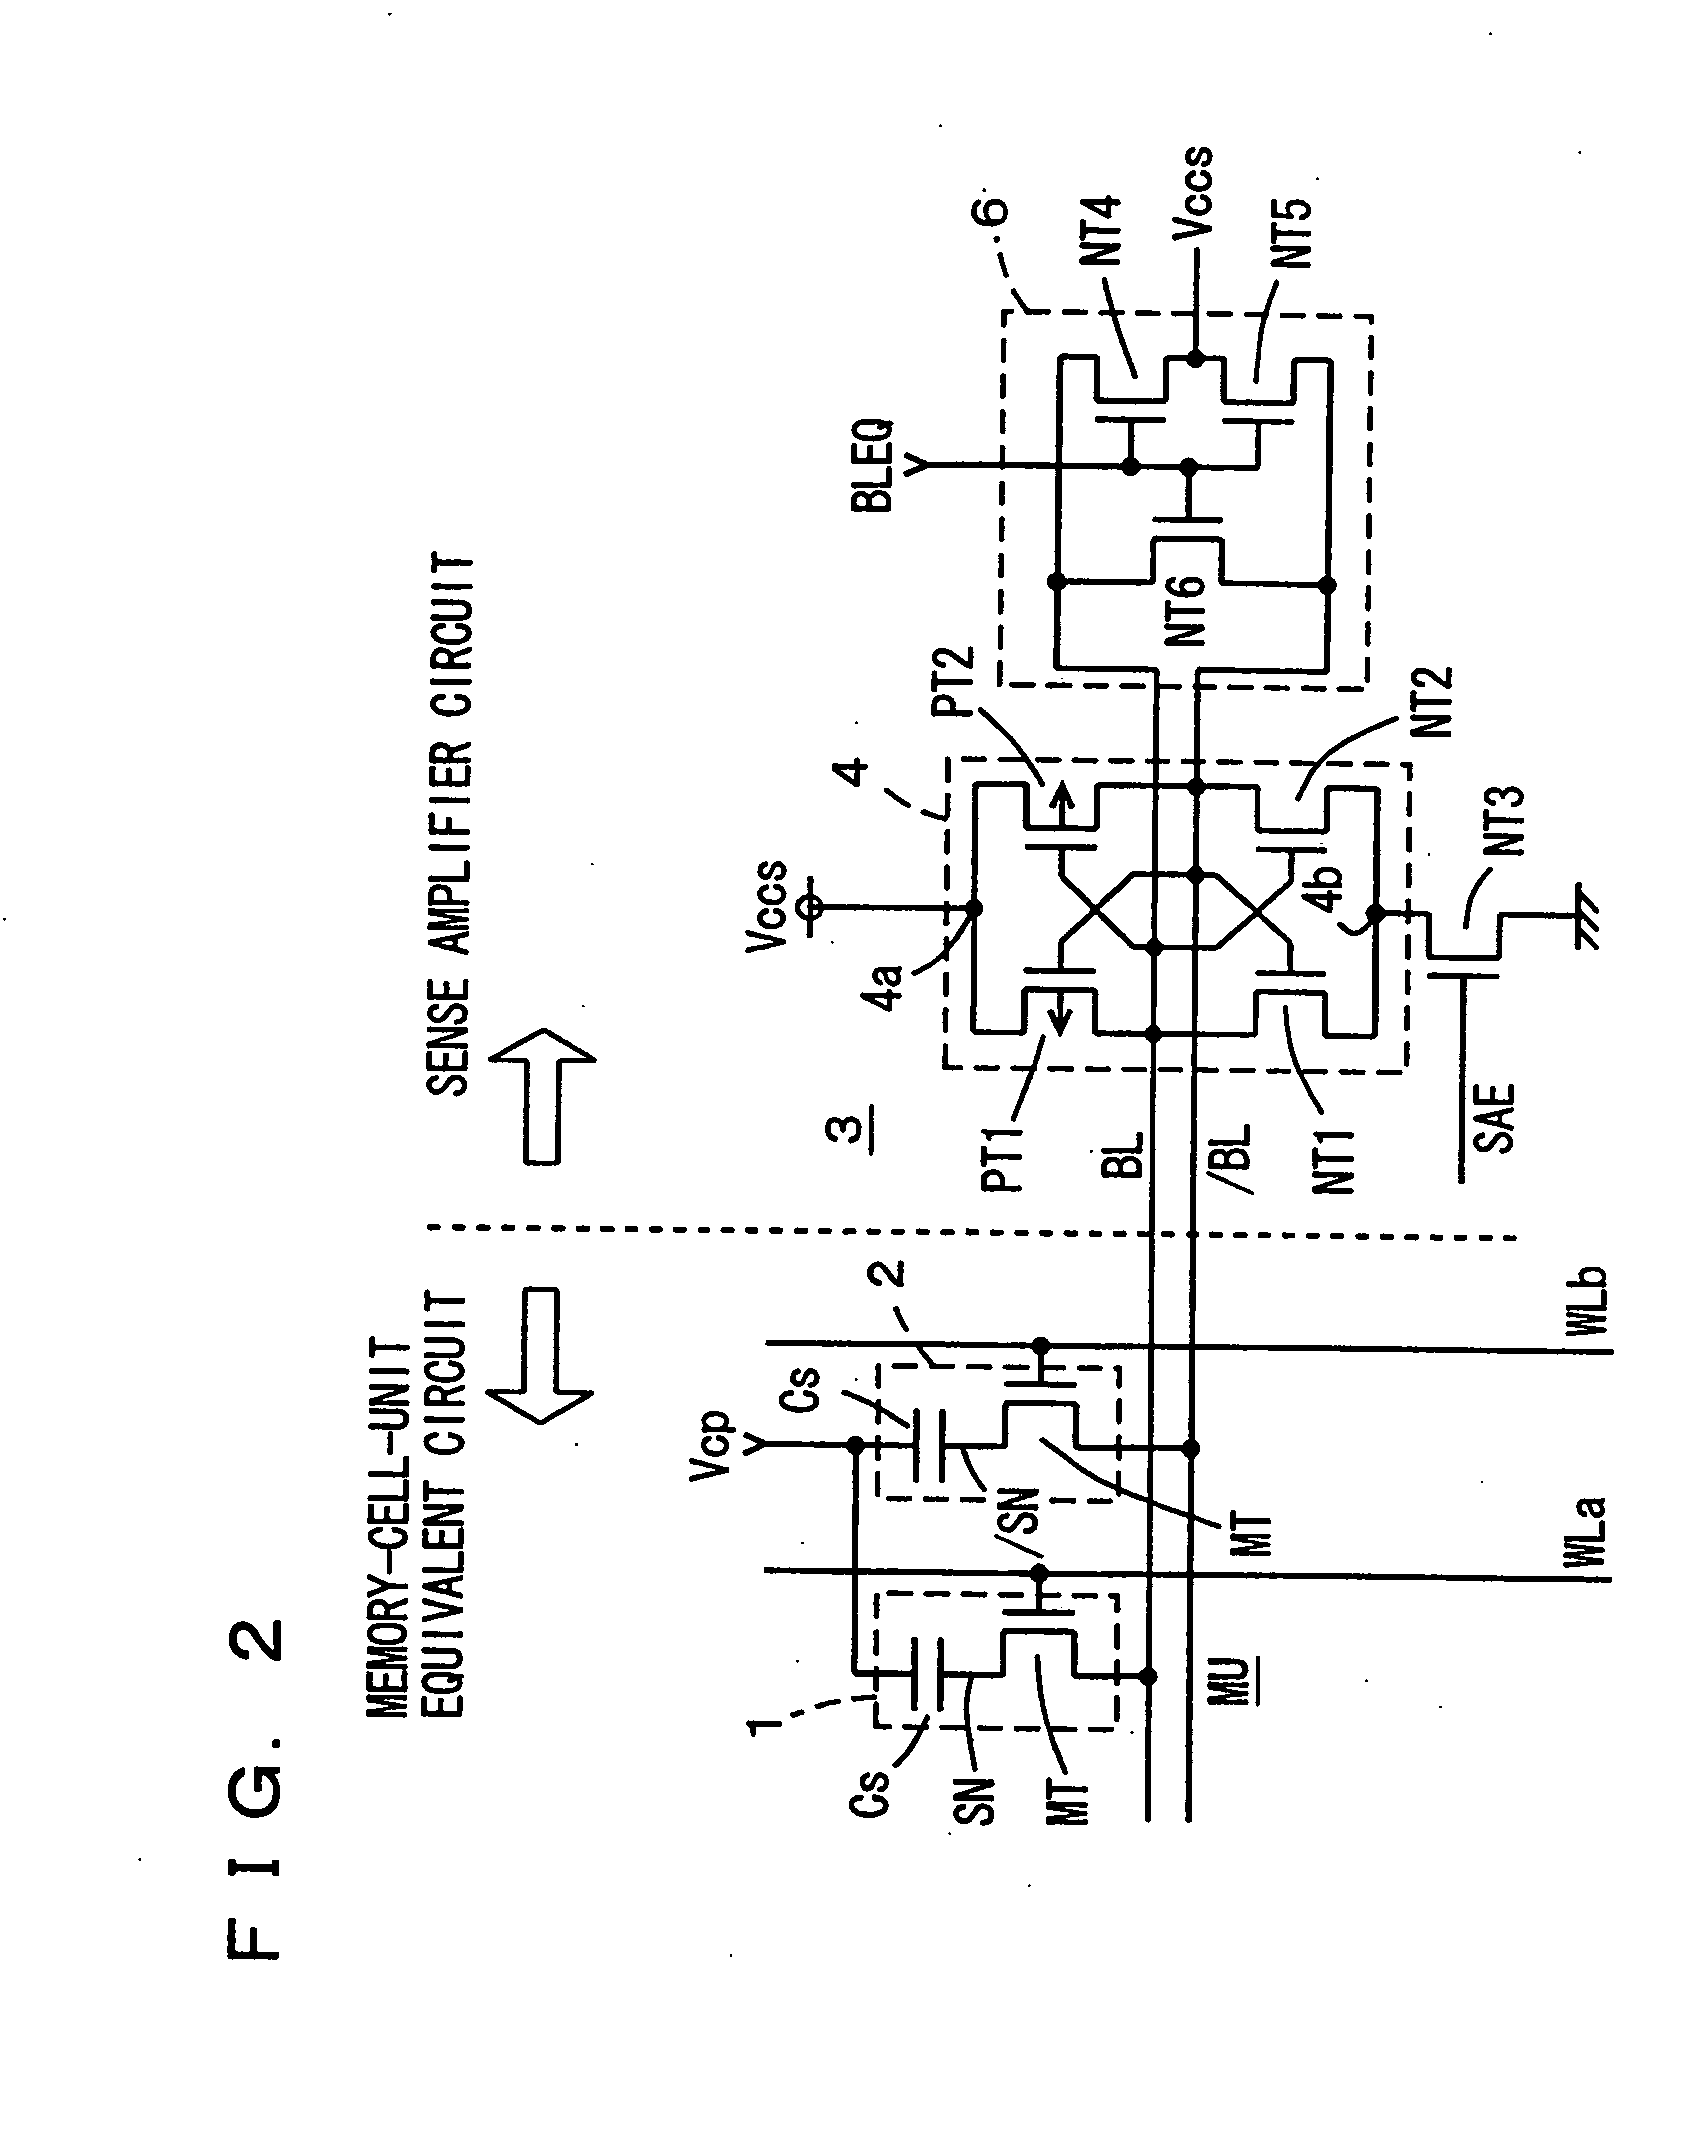 Low-power consumption semiconductor memory device